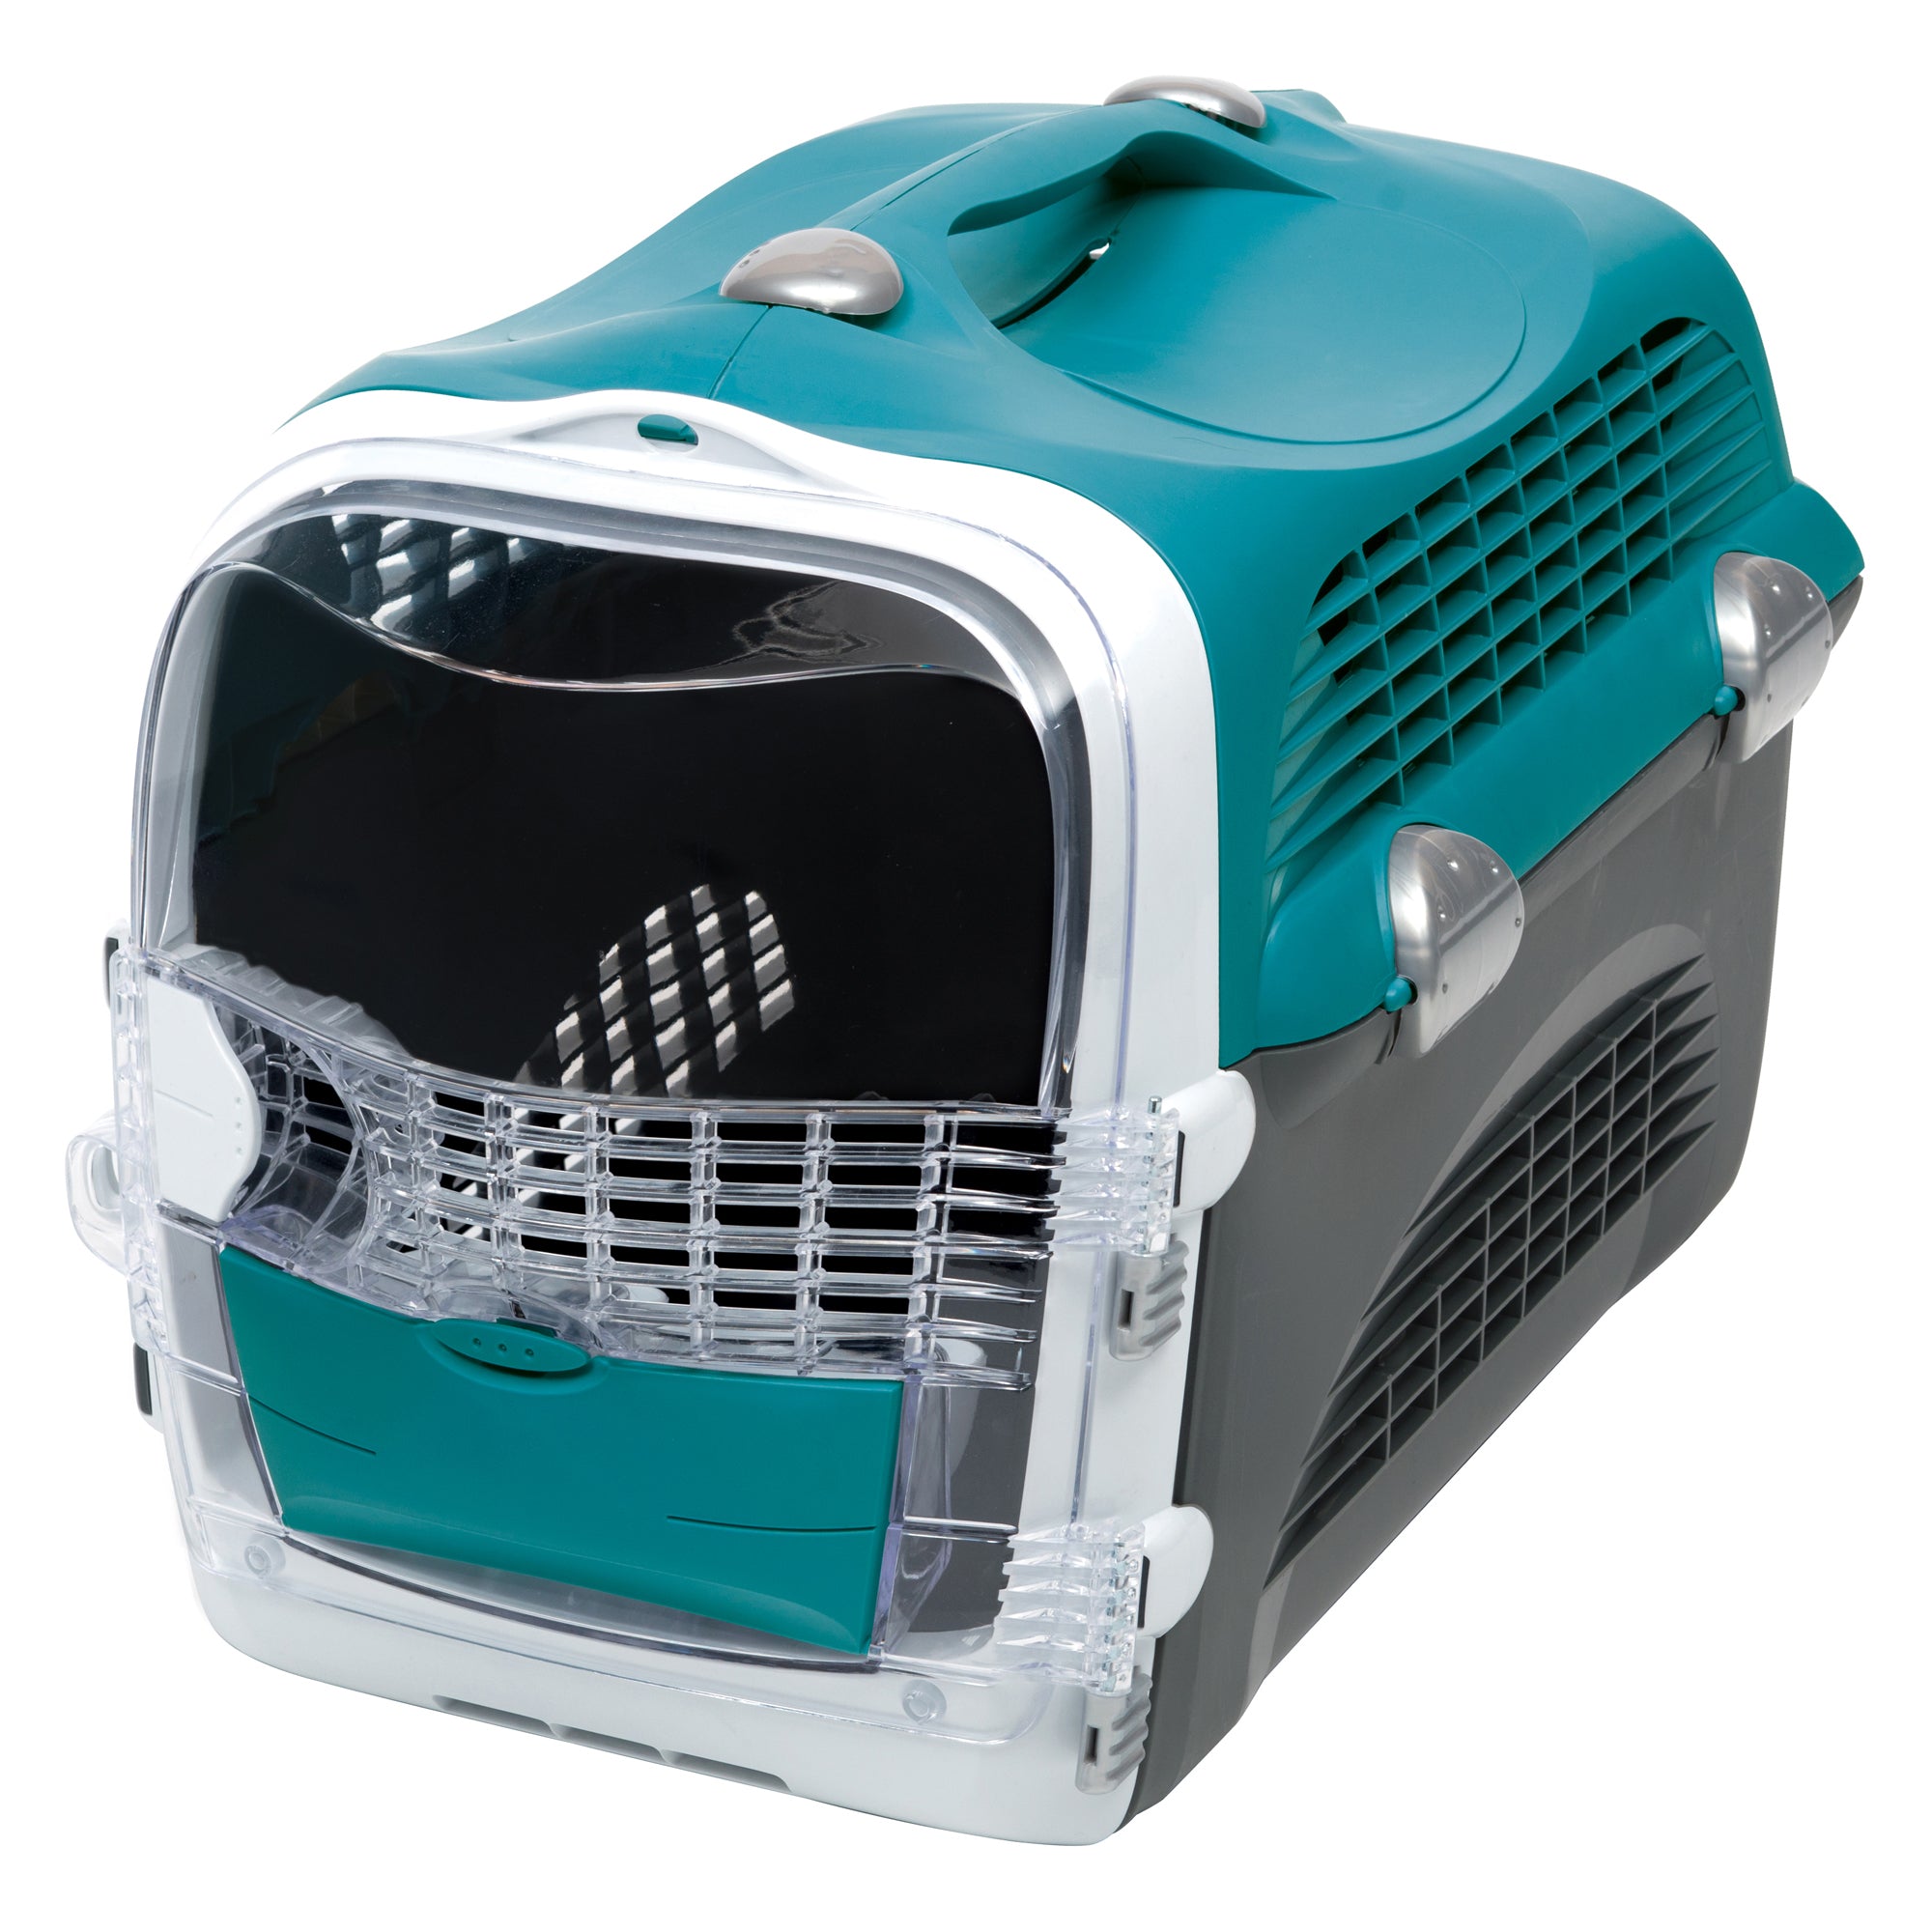 Catit Cabrio Carrier - Turquoise - 51 L x 33 W x 35 H cm (20 x 13 x 13.75 in)